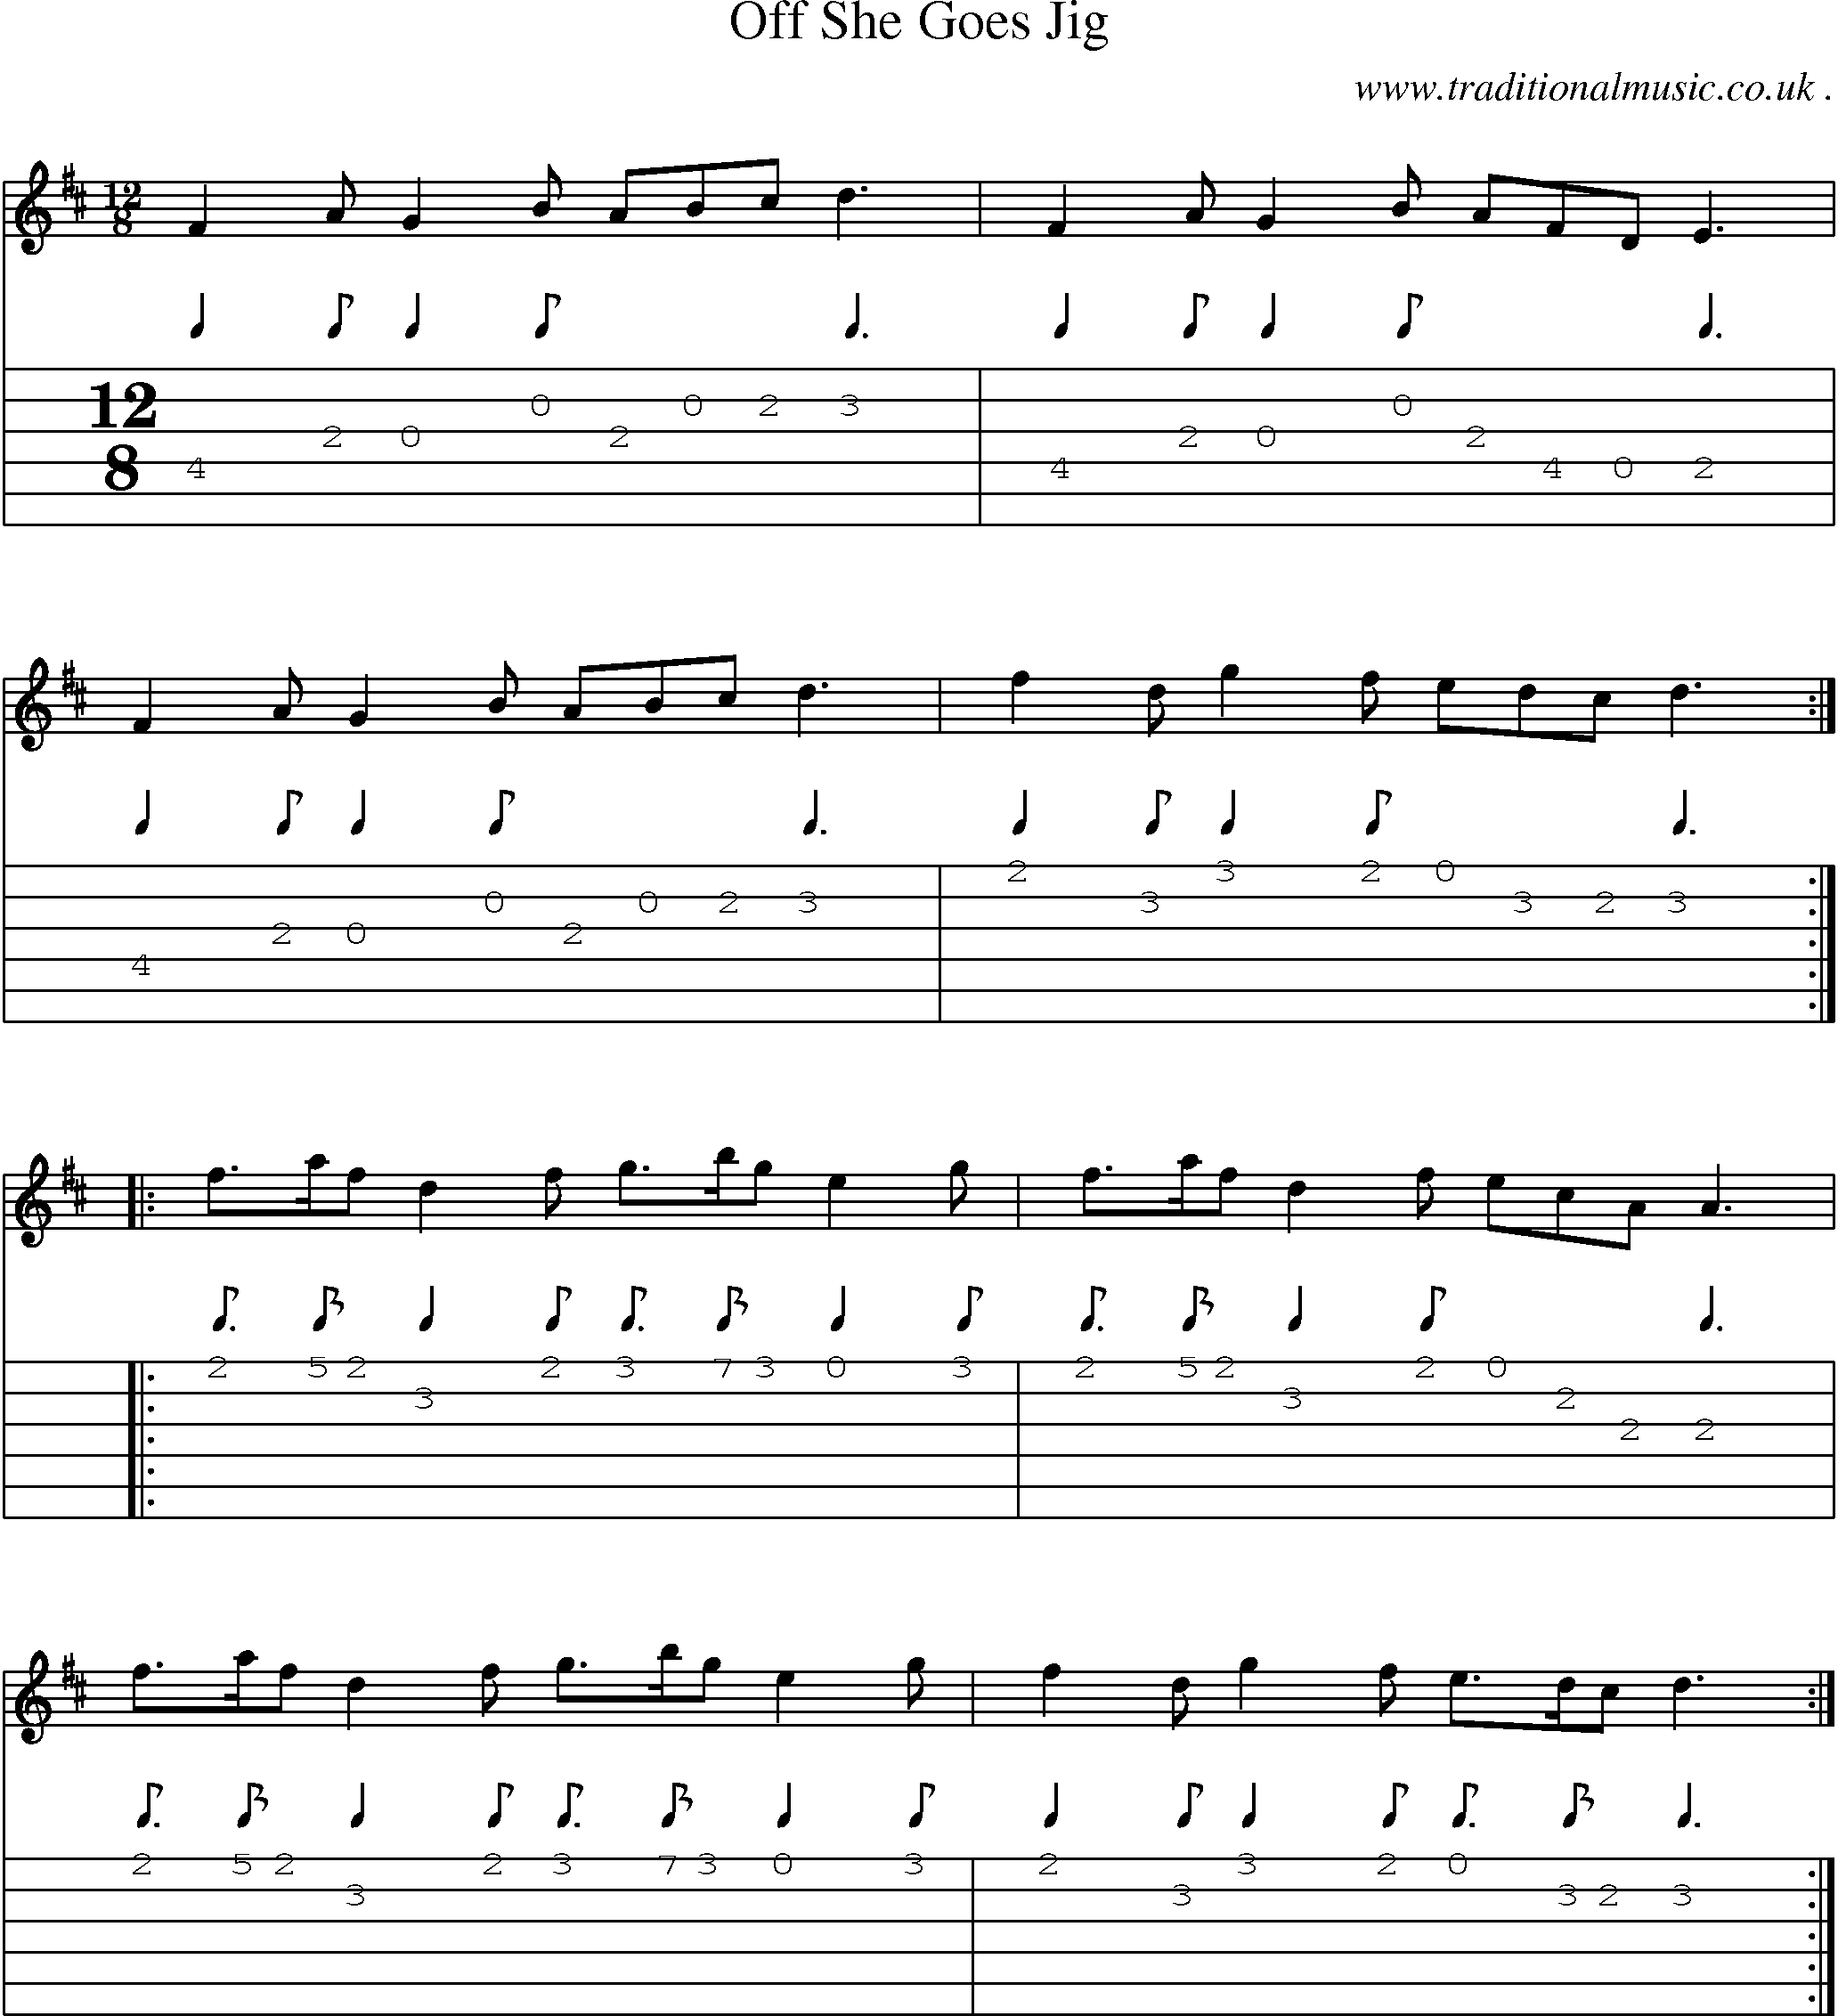 Sheet-Music and Guitar Tabs for Off She Goes Jig